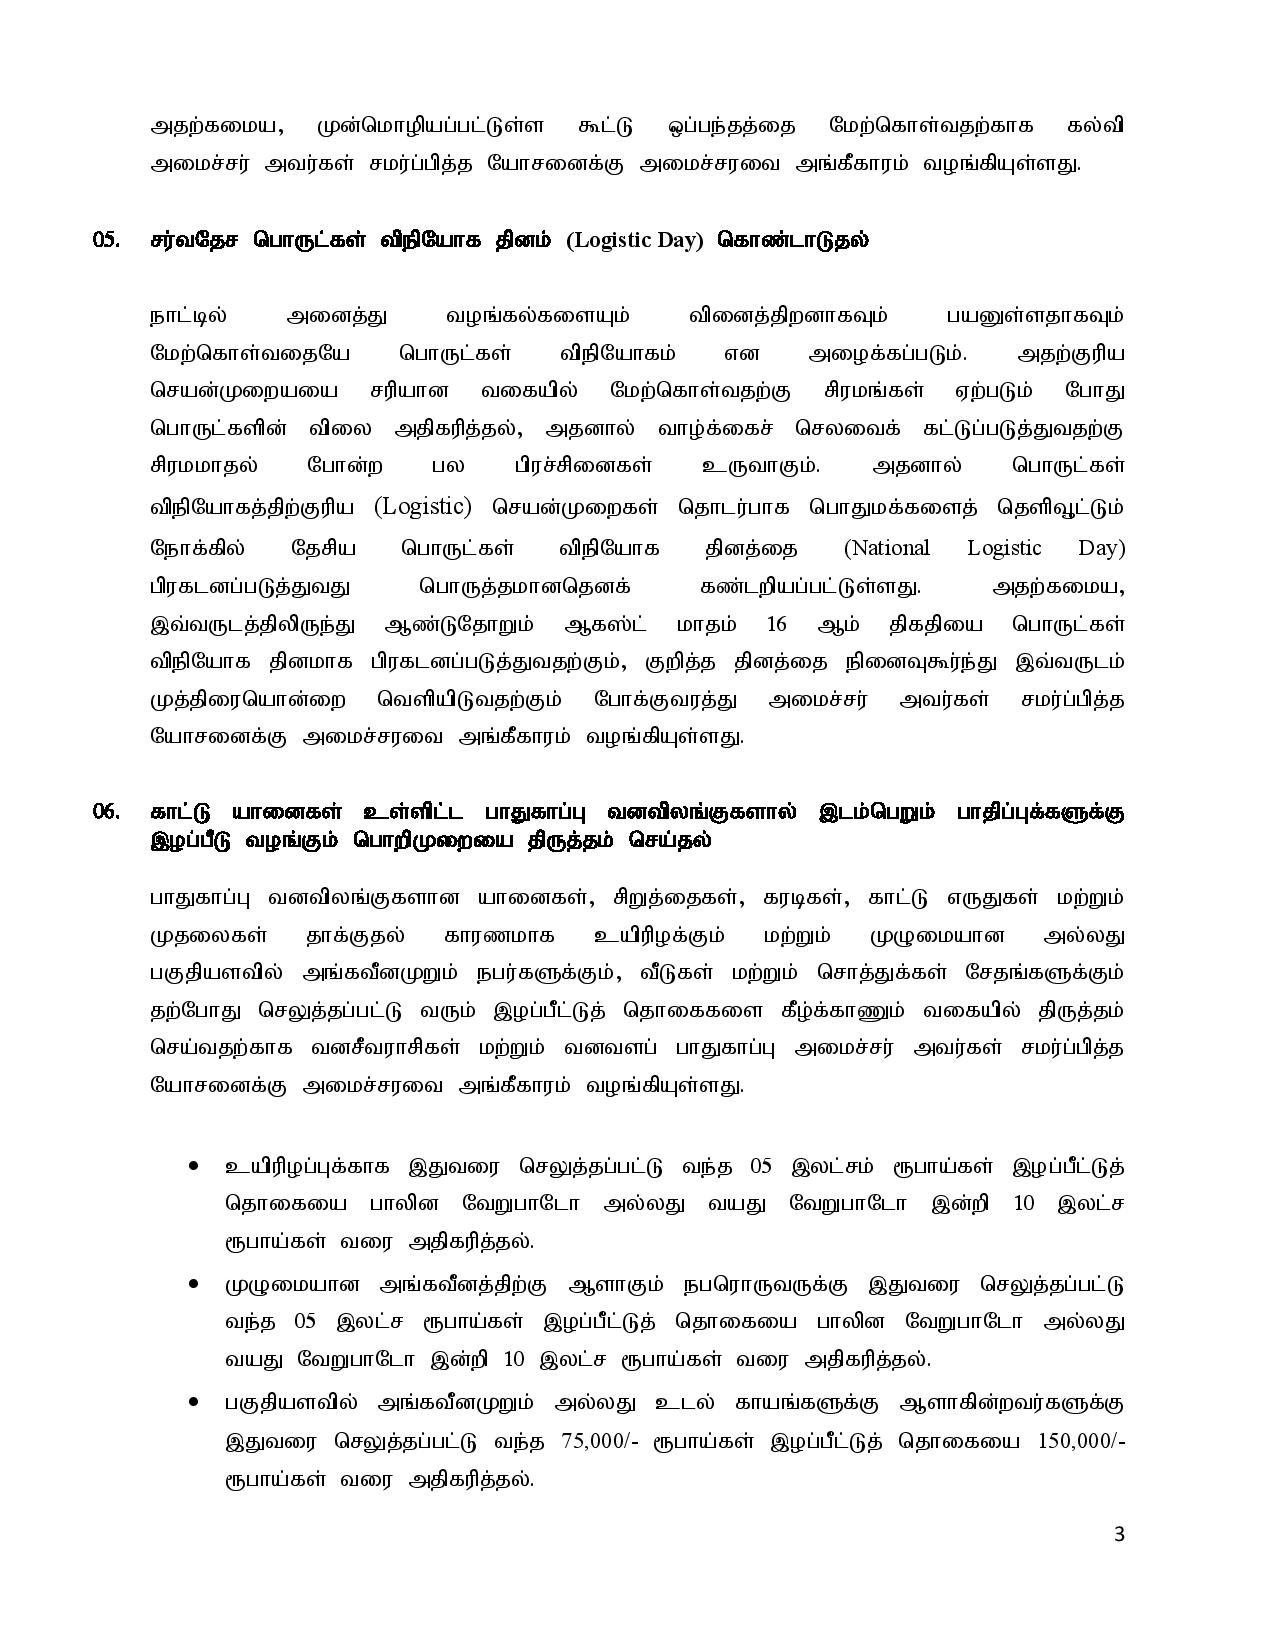 Cabinet Decisions on 02.08.2021 Tamil page 003